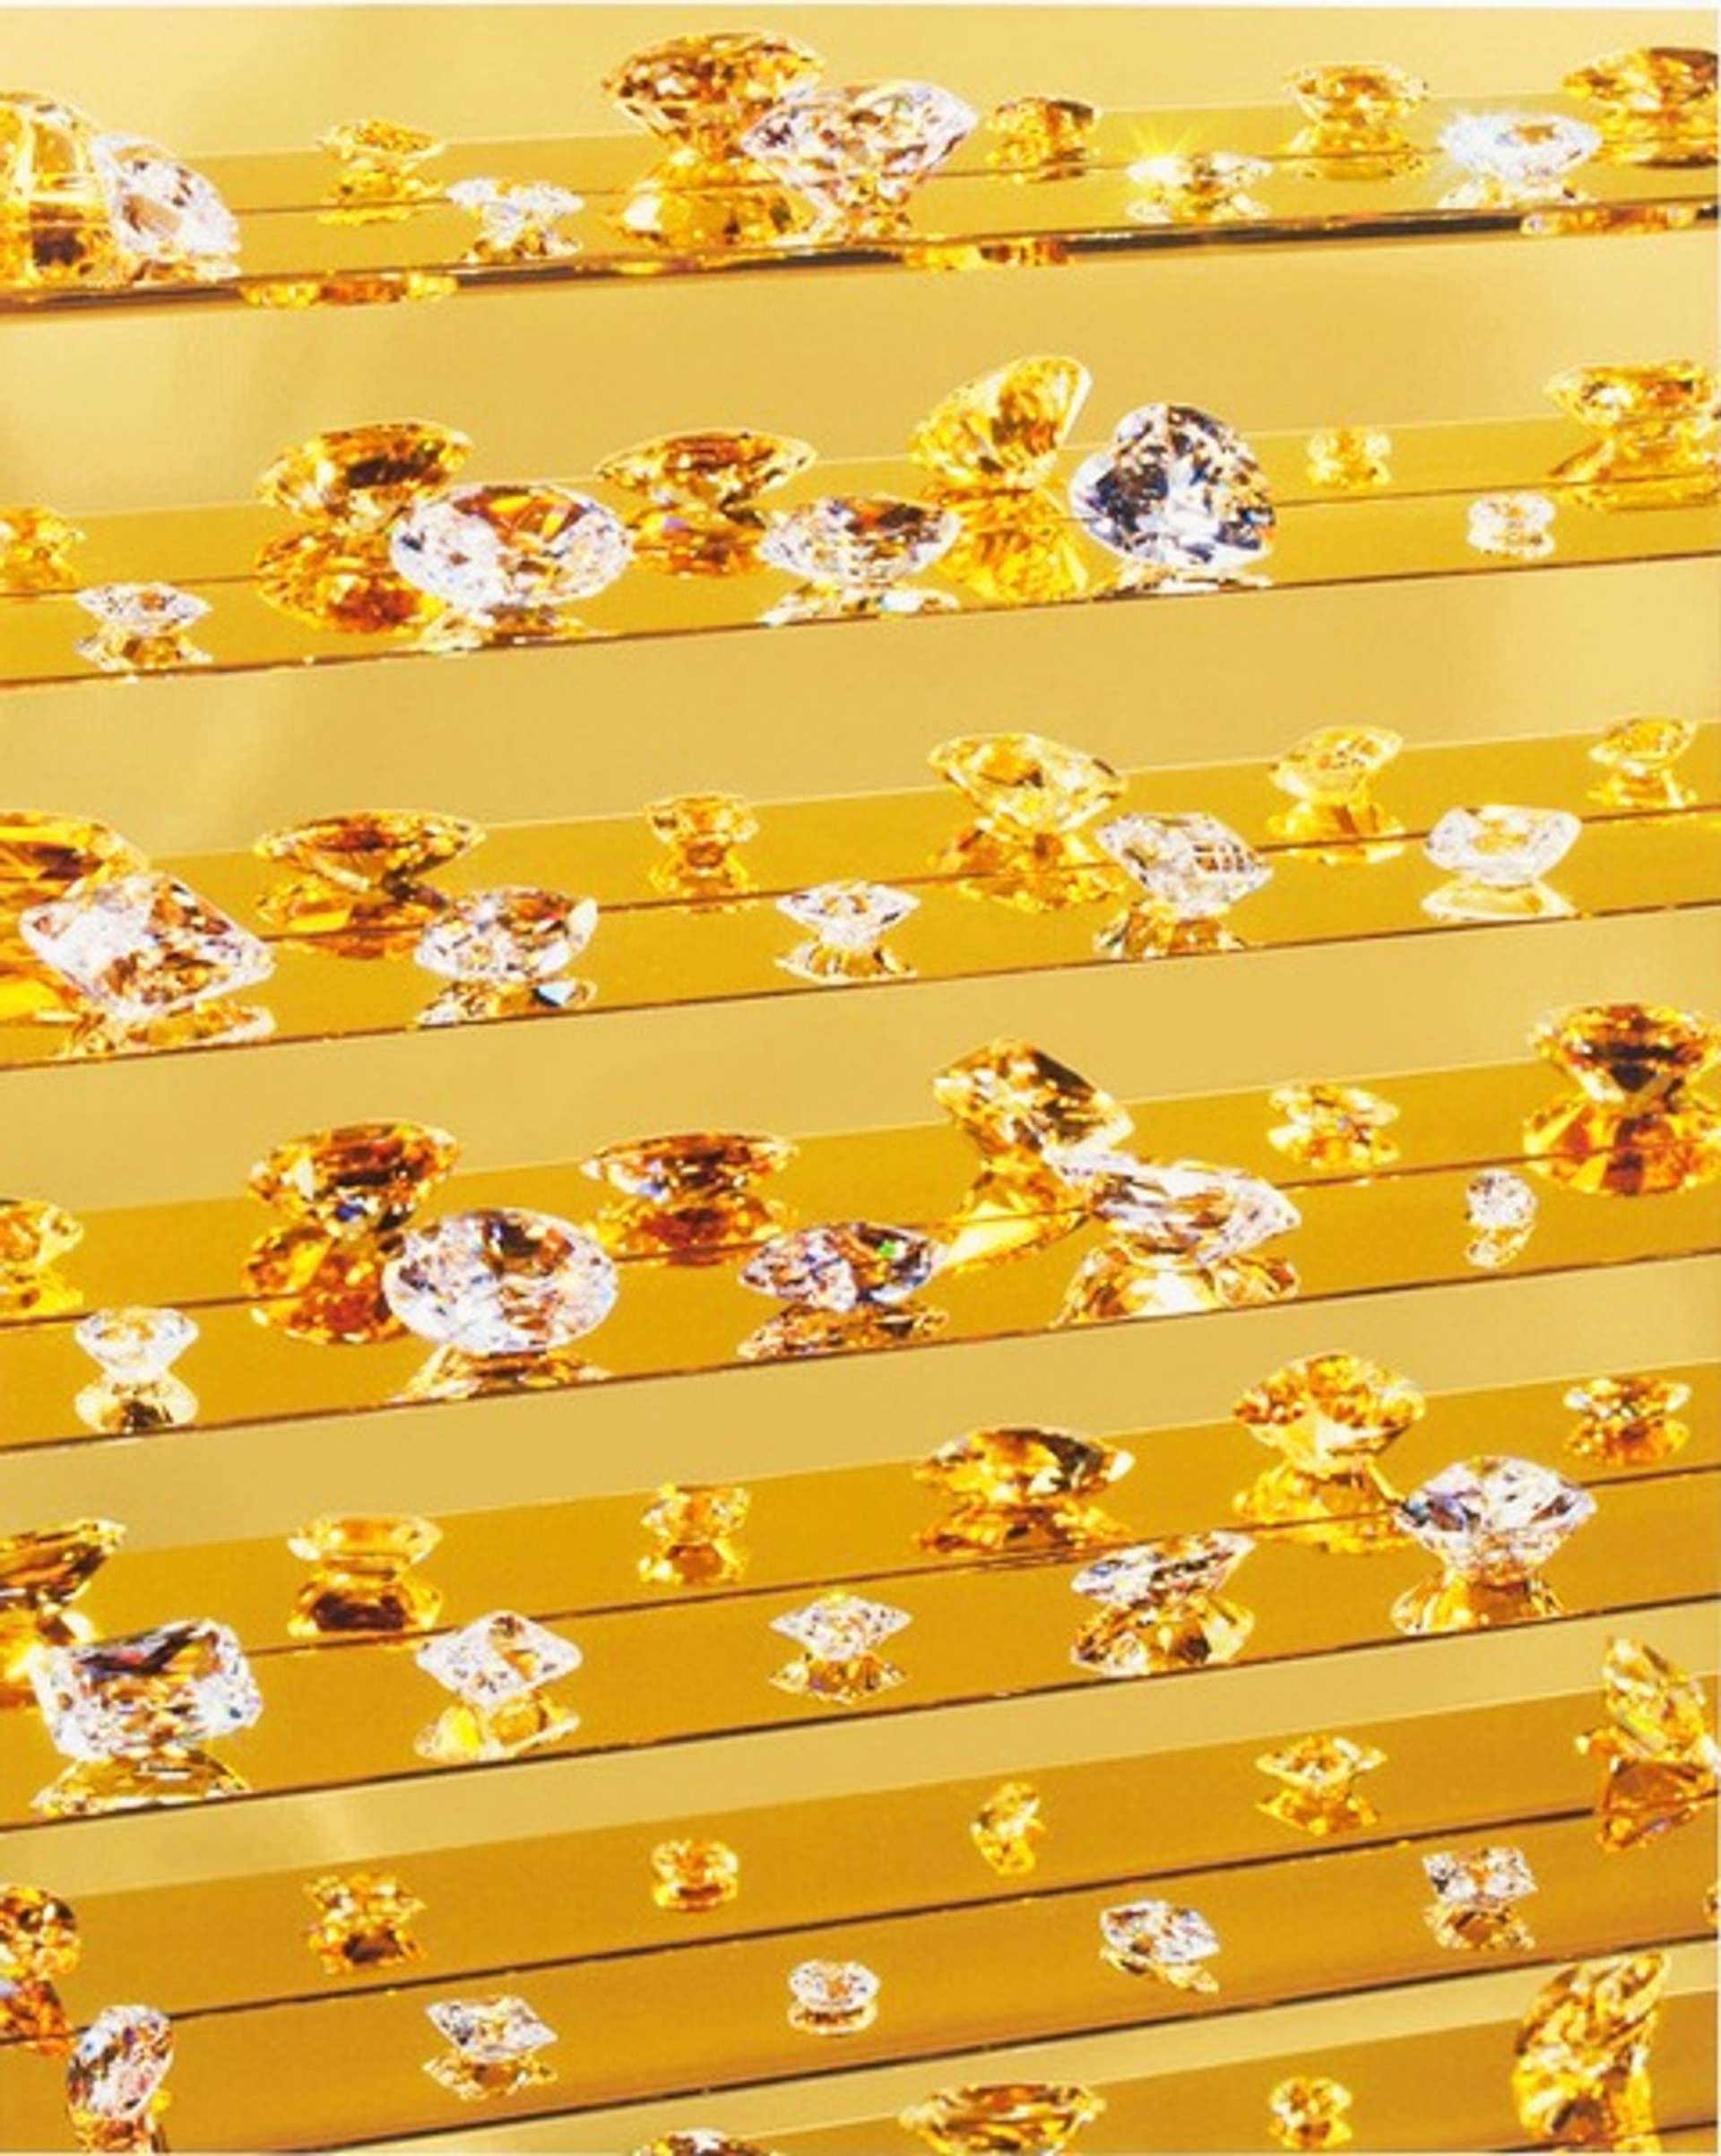 A series of gold shelves against a mirrored background. Diamonds, in varying shapes and sizes, line the shelves and reflect the golden light.